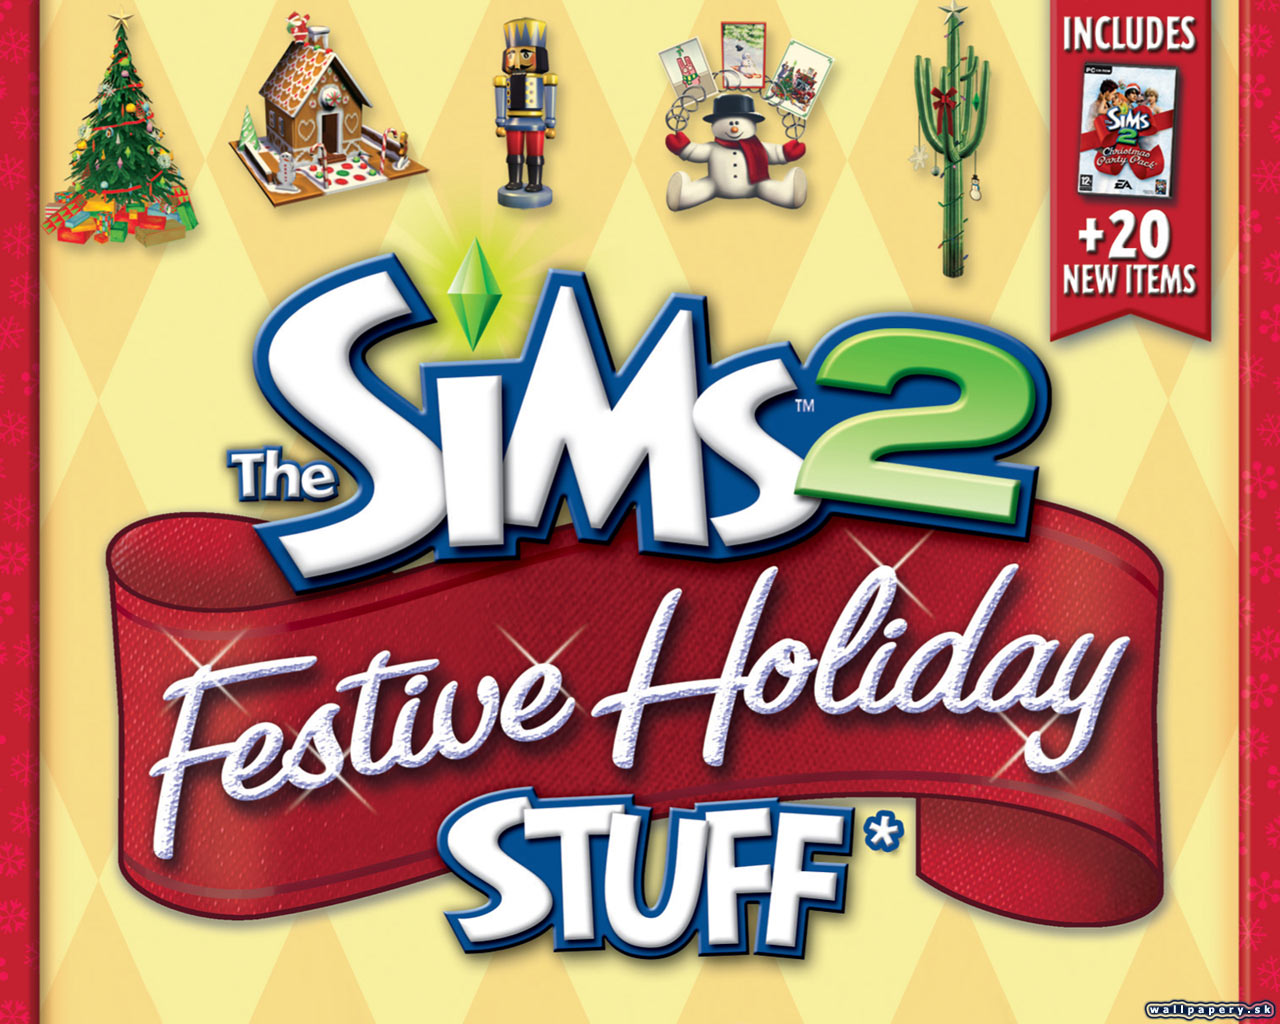 The Sims 2: Happy Holiday Stuff - wallpaper 4